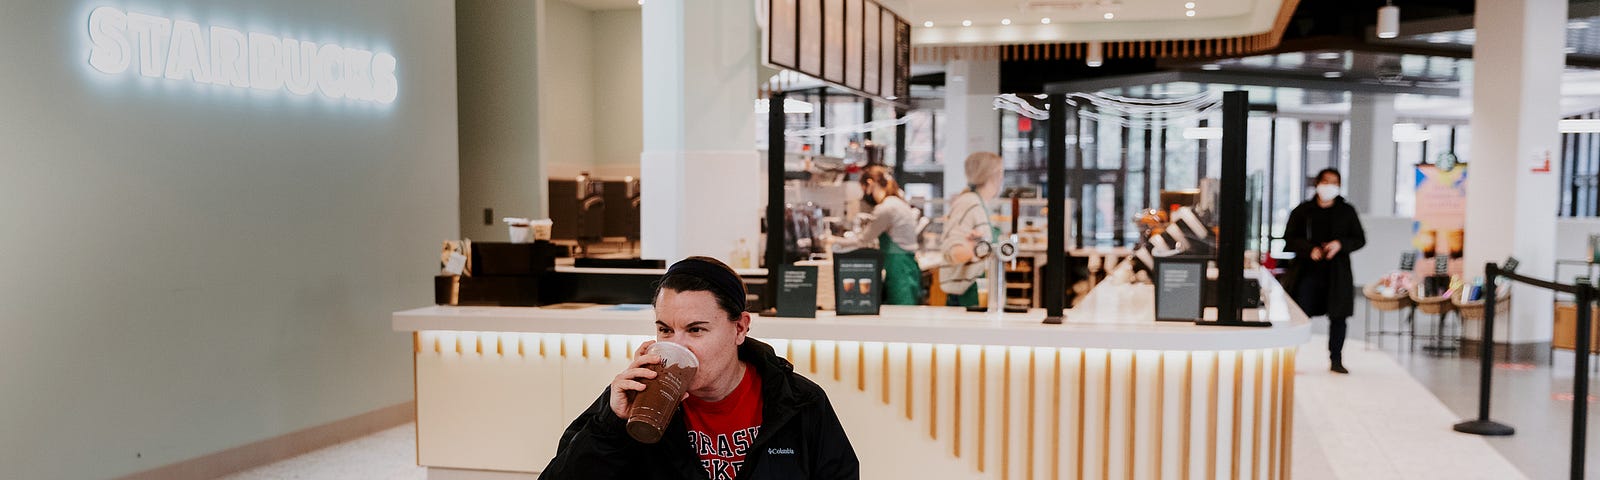 A person drinks coffee at the East Campus Starbucks